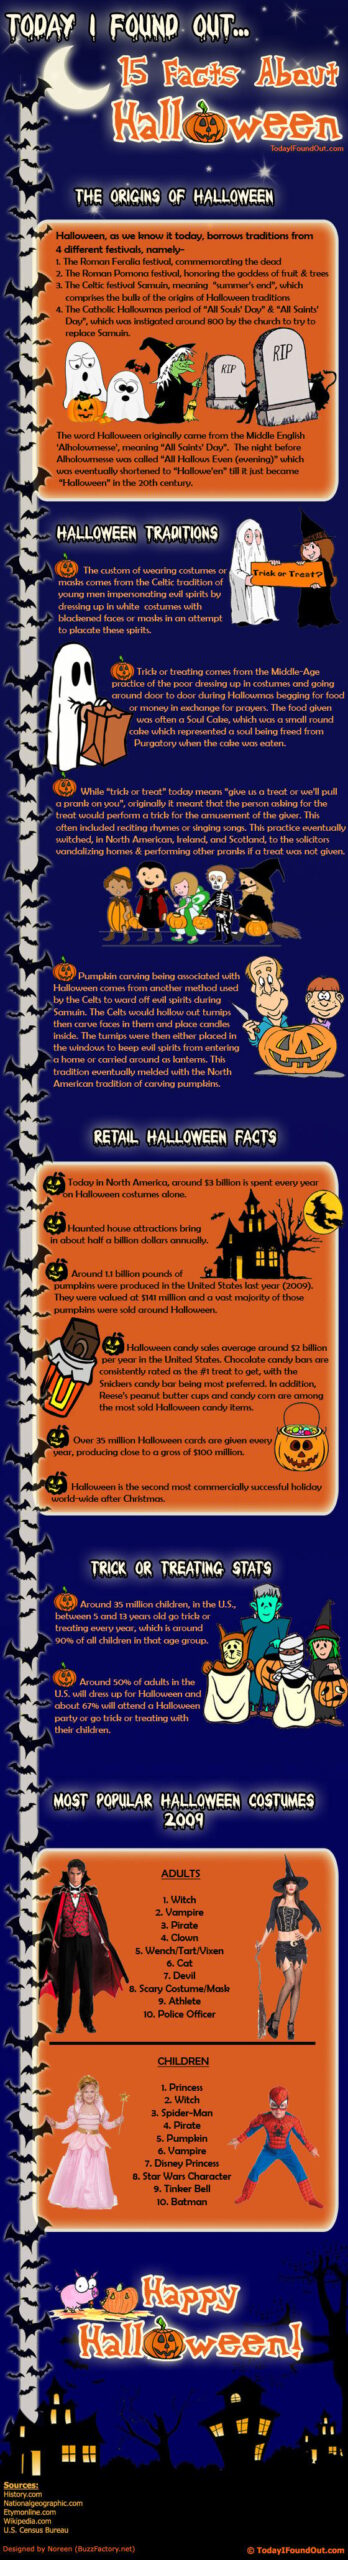 15 Facts About Halloween-Infographic